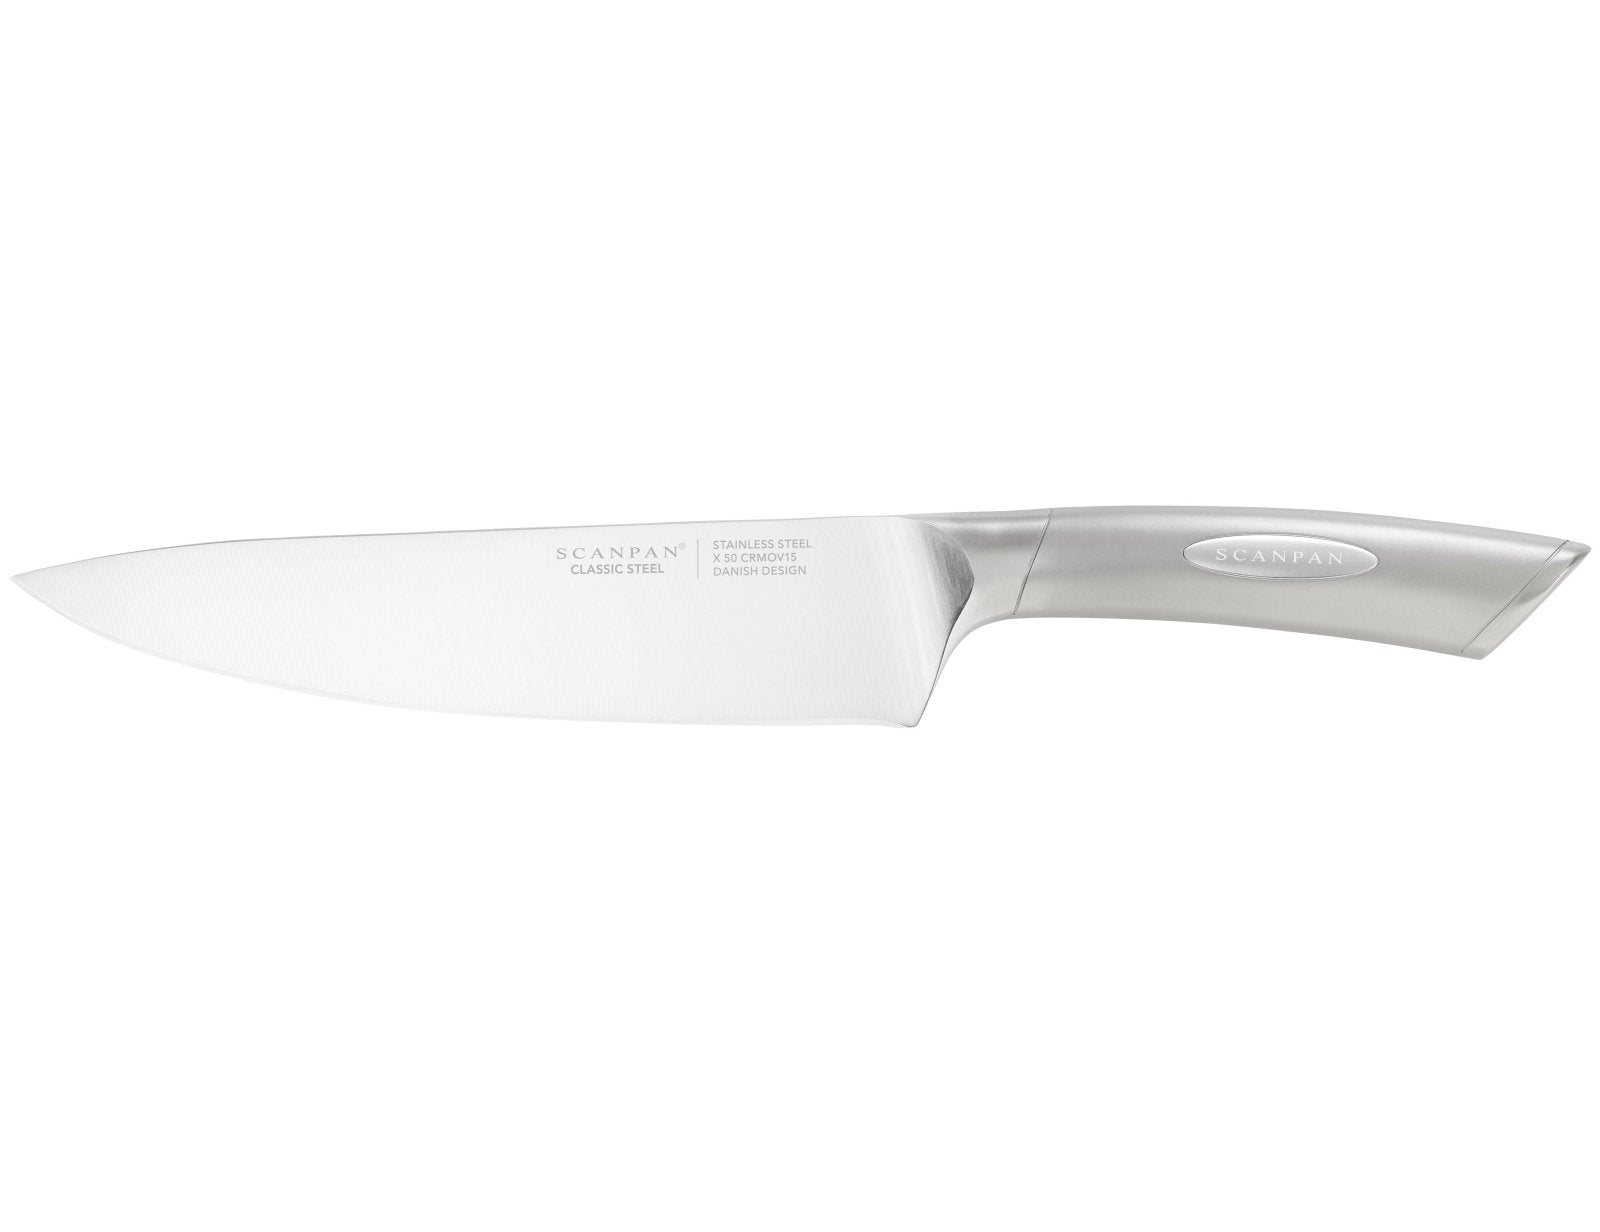 Scanpan Classic Steel 20cm Cook's Knife - SP9001502000 - The Cotswold Knife Company